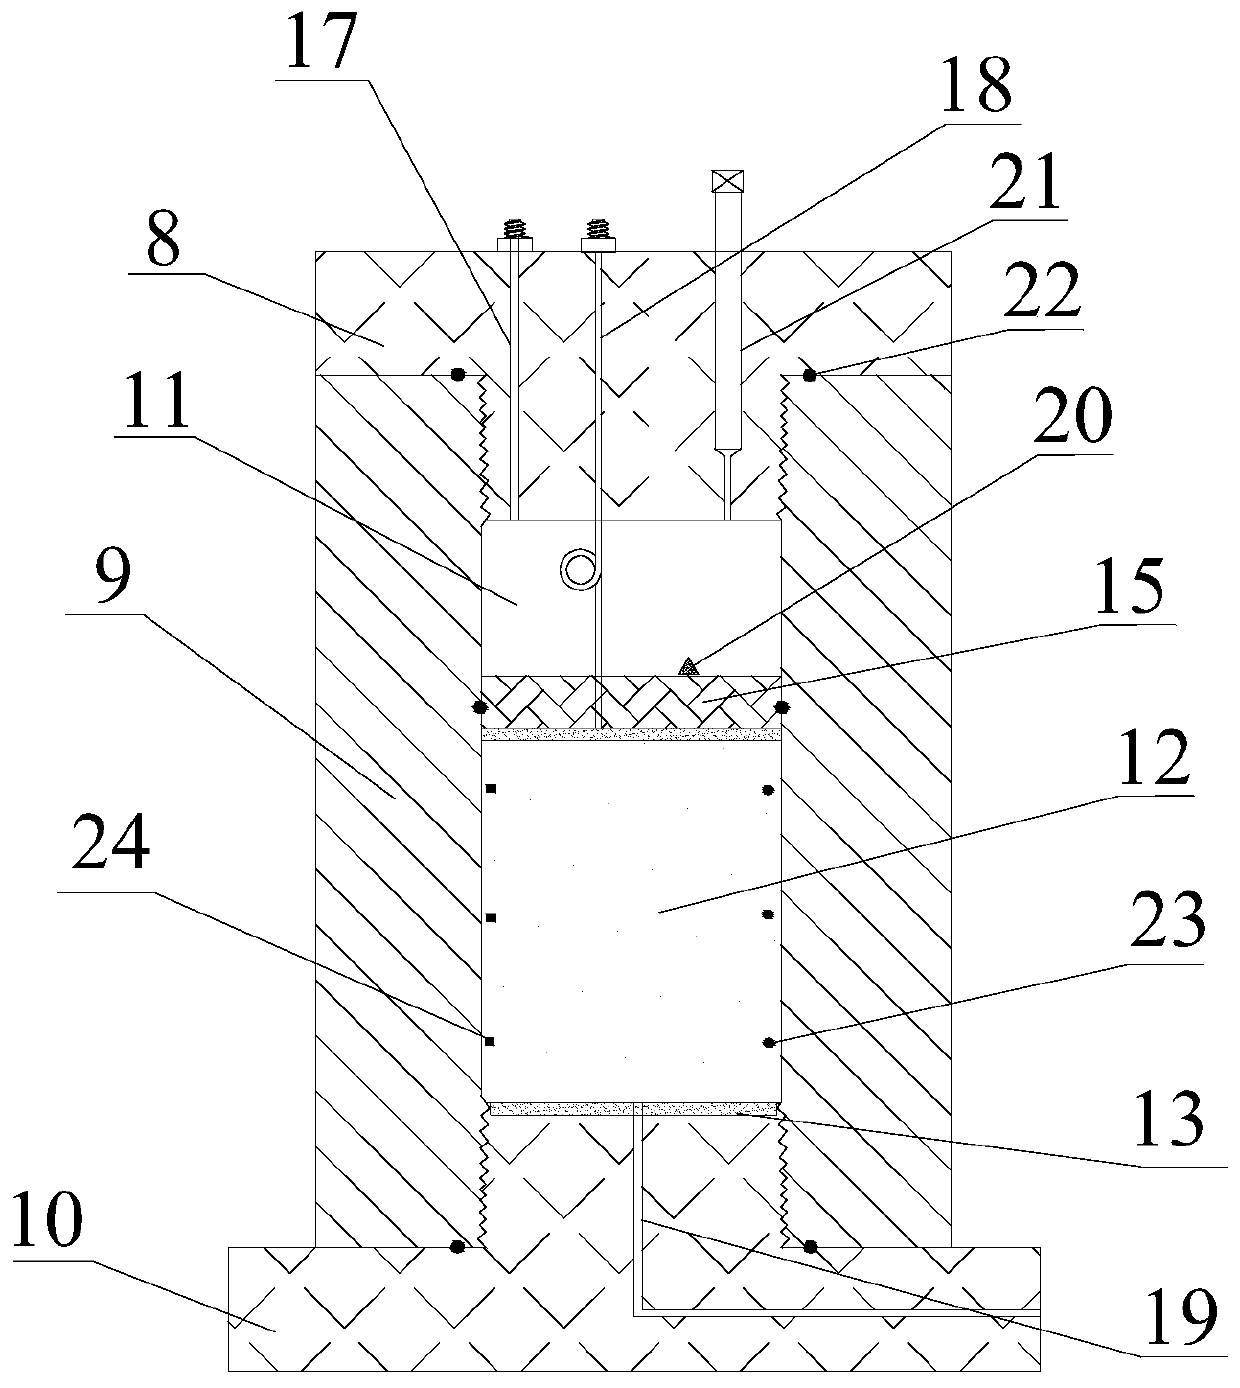 Pressure-loaded one-dimensional consolidation and permeability joint test device